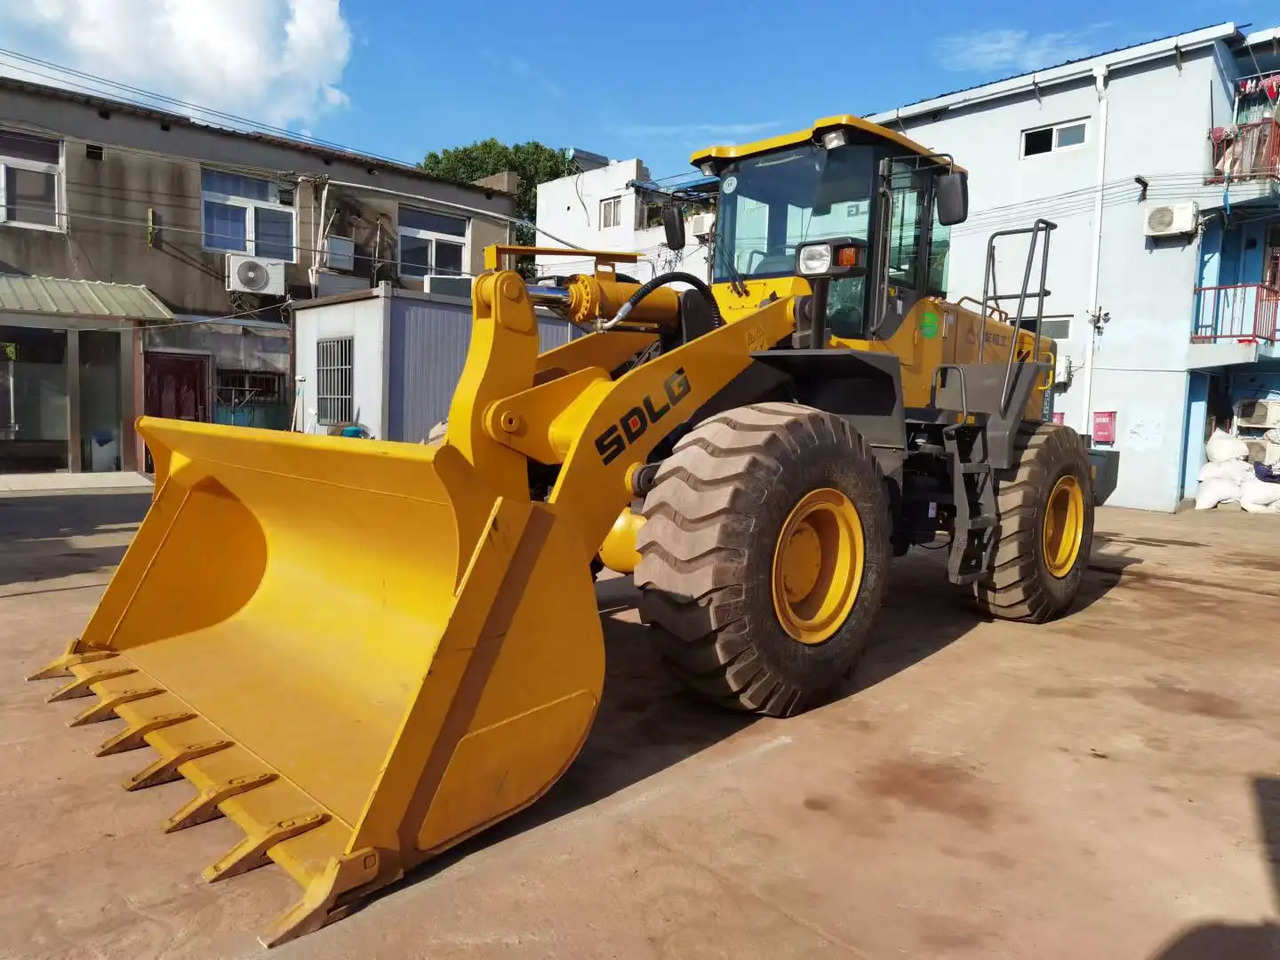 Wiellader SDLG956L USED almost new front wheeled loaders wheel loader 10ton loader 10 tons